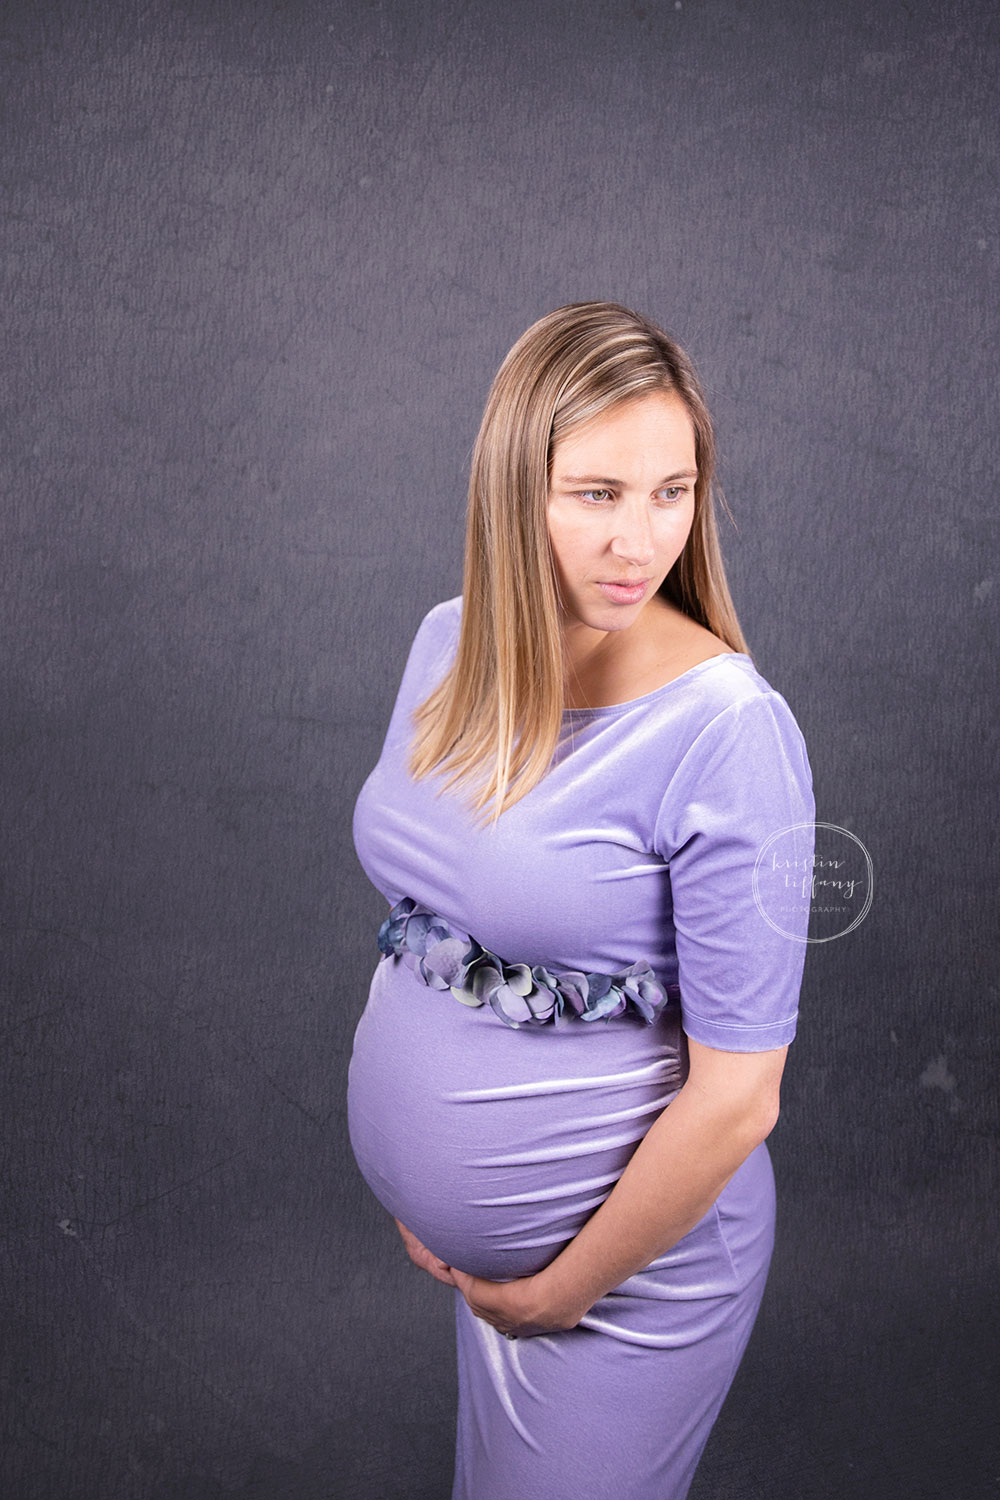 a maternity photo of a pregnant woman at her photo shoot